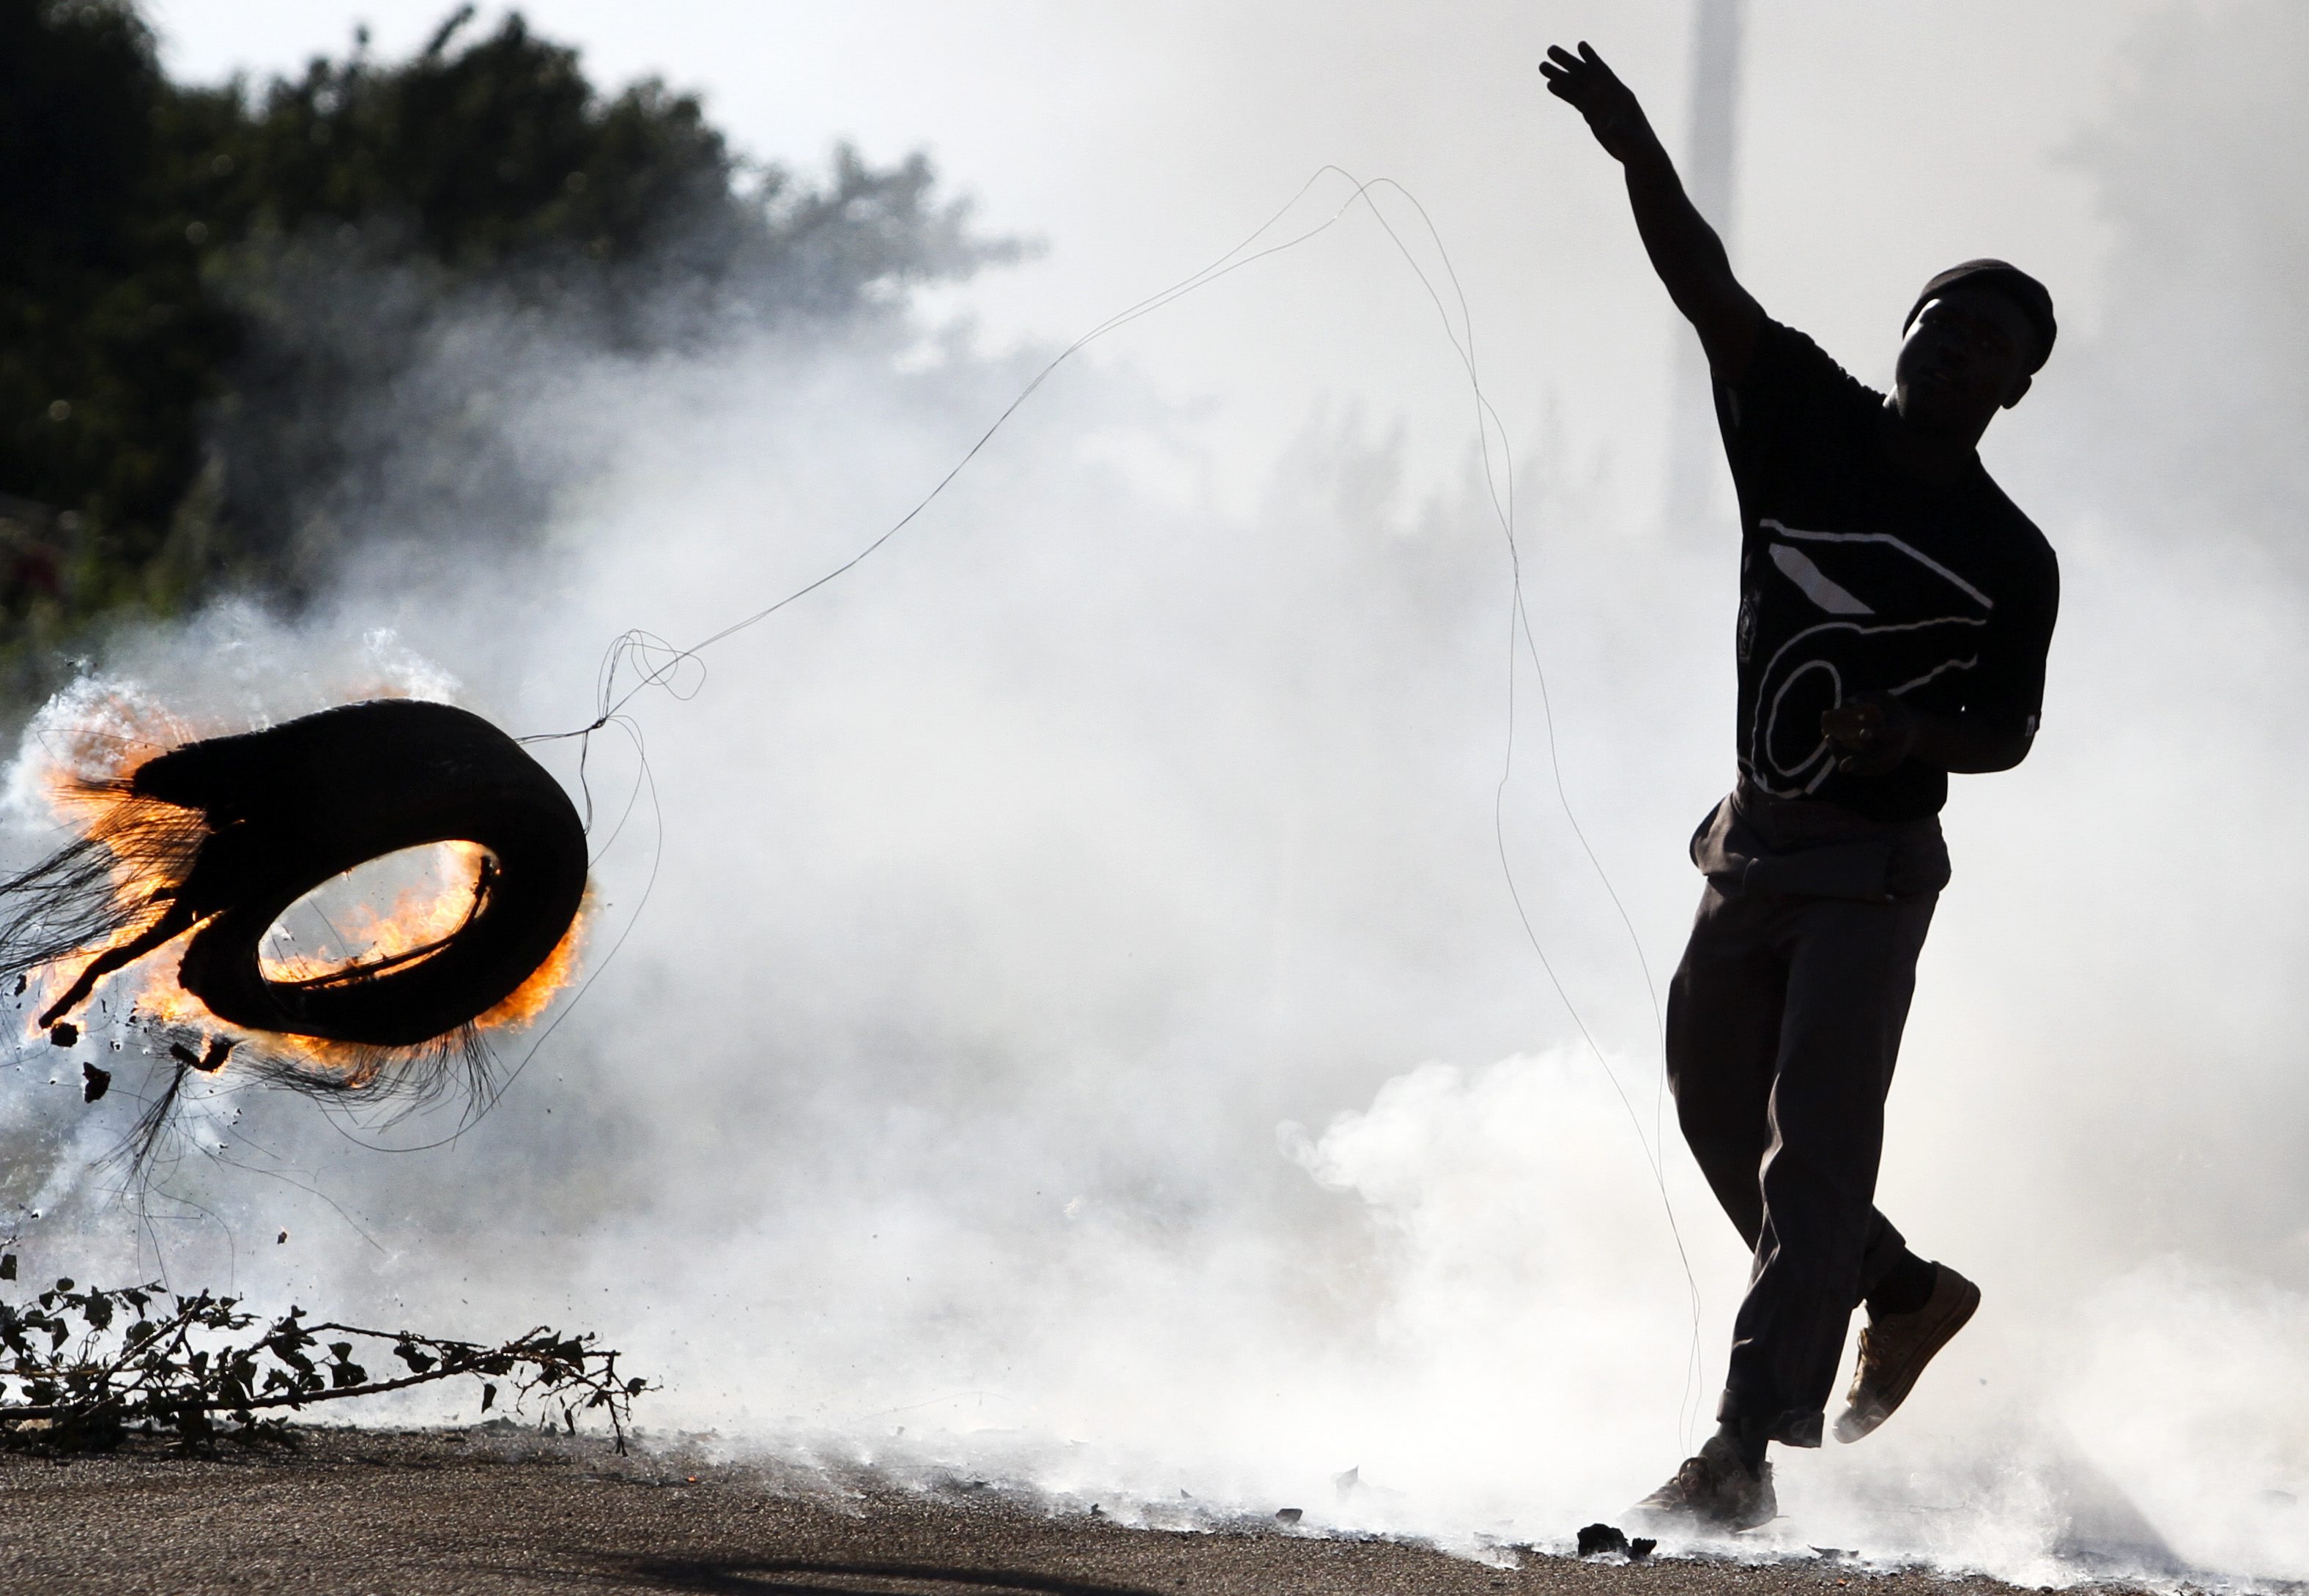 A South African man hurls a burning tire in Johannesburg during protests over squalid living conditions in 2010. Conditions for the poor are worsening around the world (Gallo Images&mdash;Getty Images)